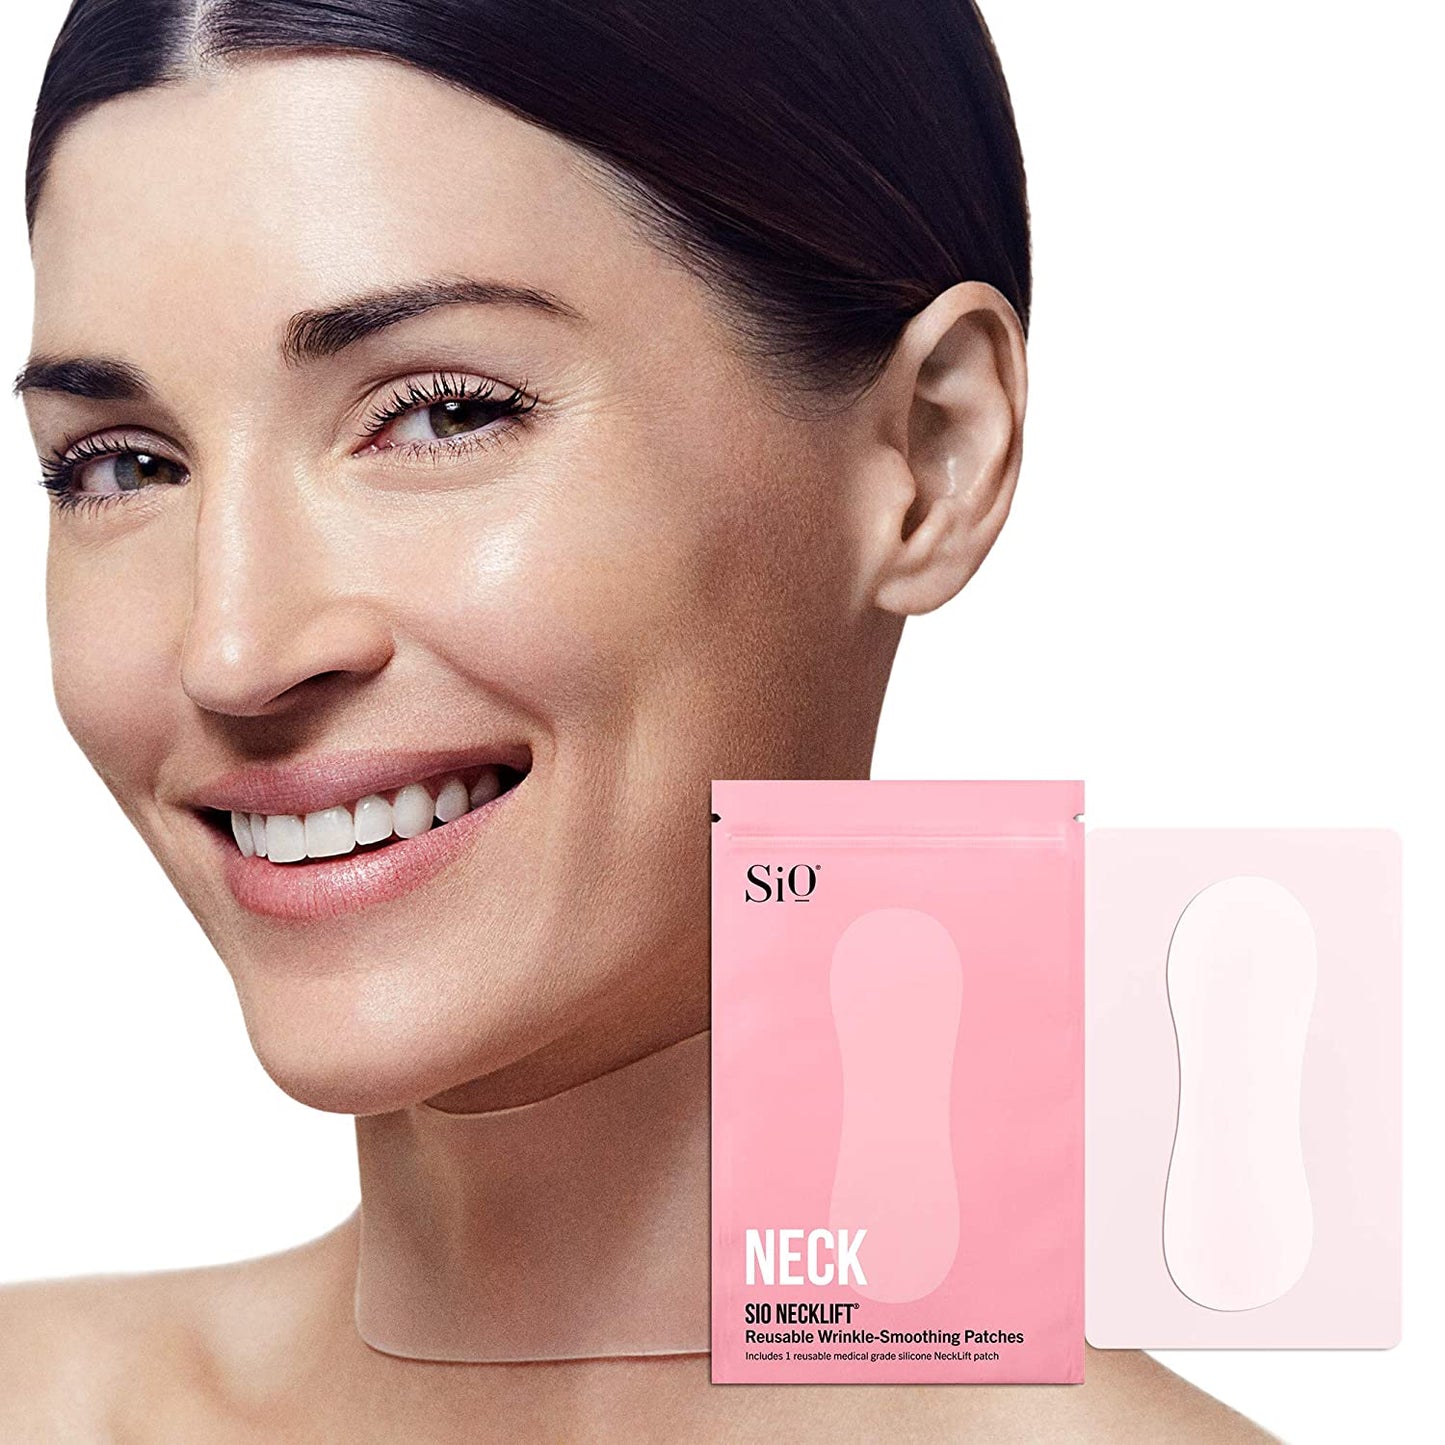 SiO Beauty NeckLift, 1 patch